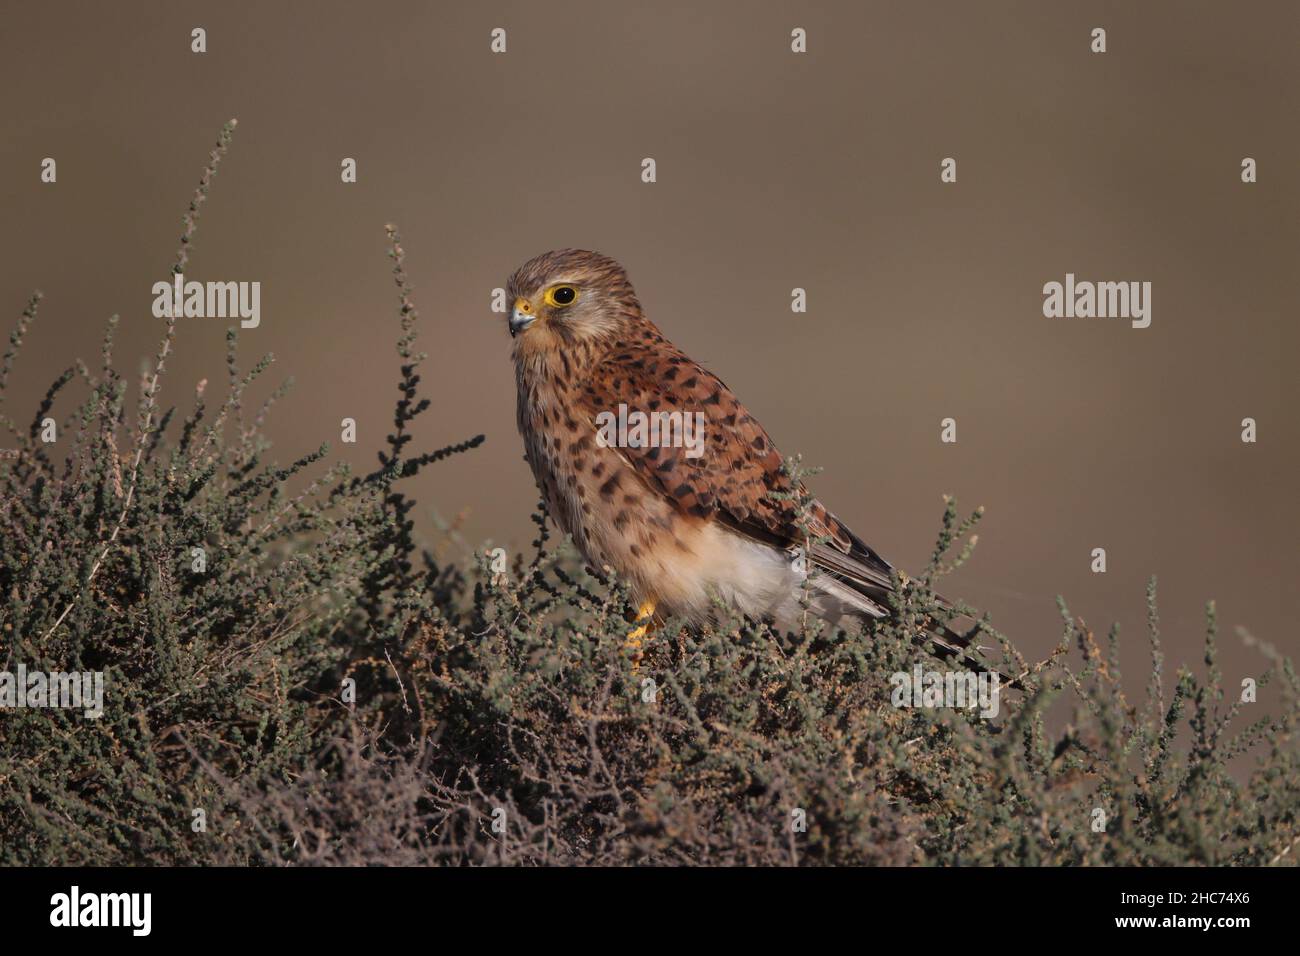 Kestrel sat on a bush in the semi desert habitat on Lanzarote, there are small mammals available as prey but far more lizards. Stock Photo